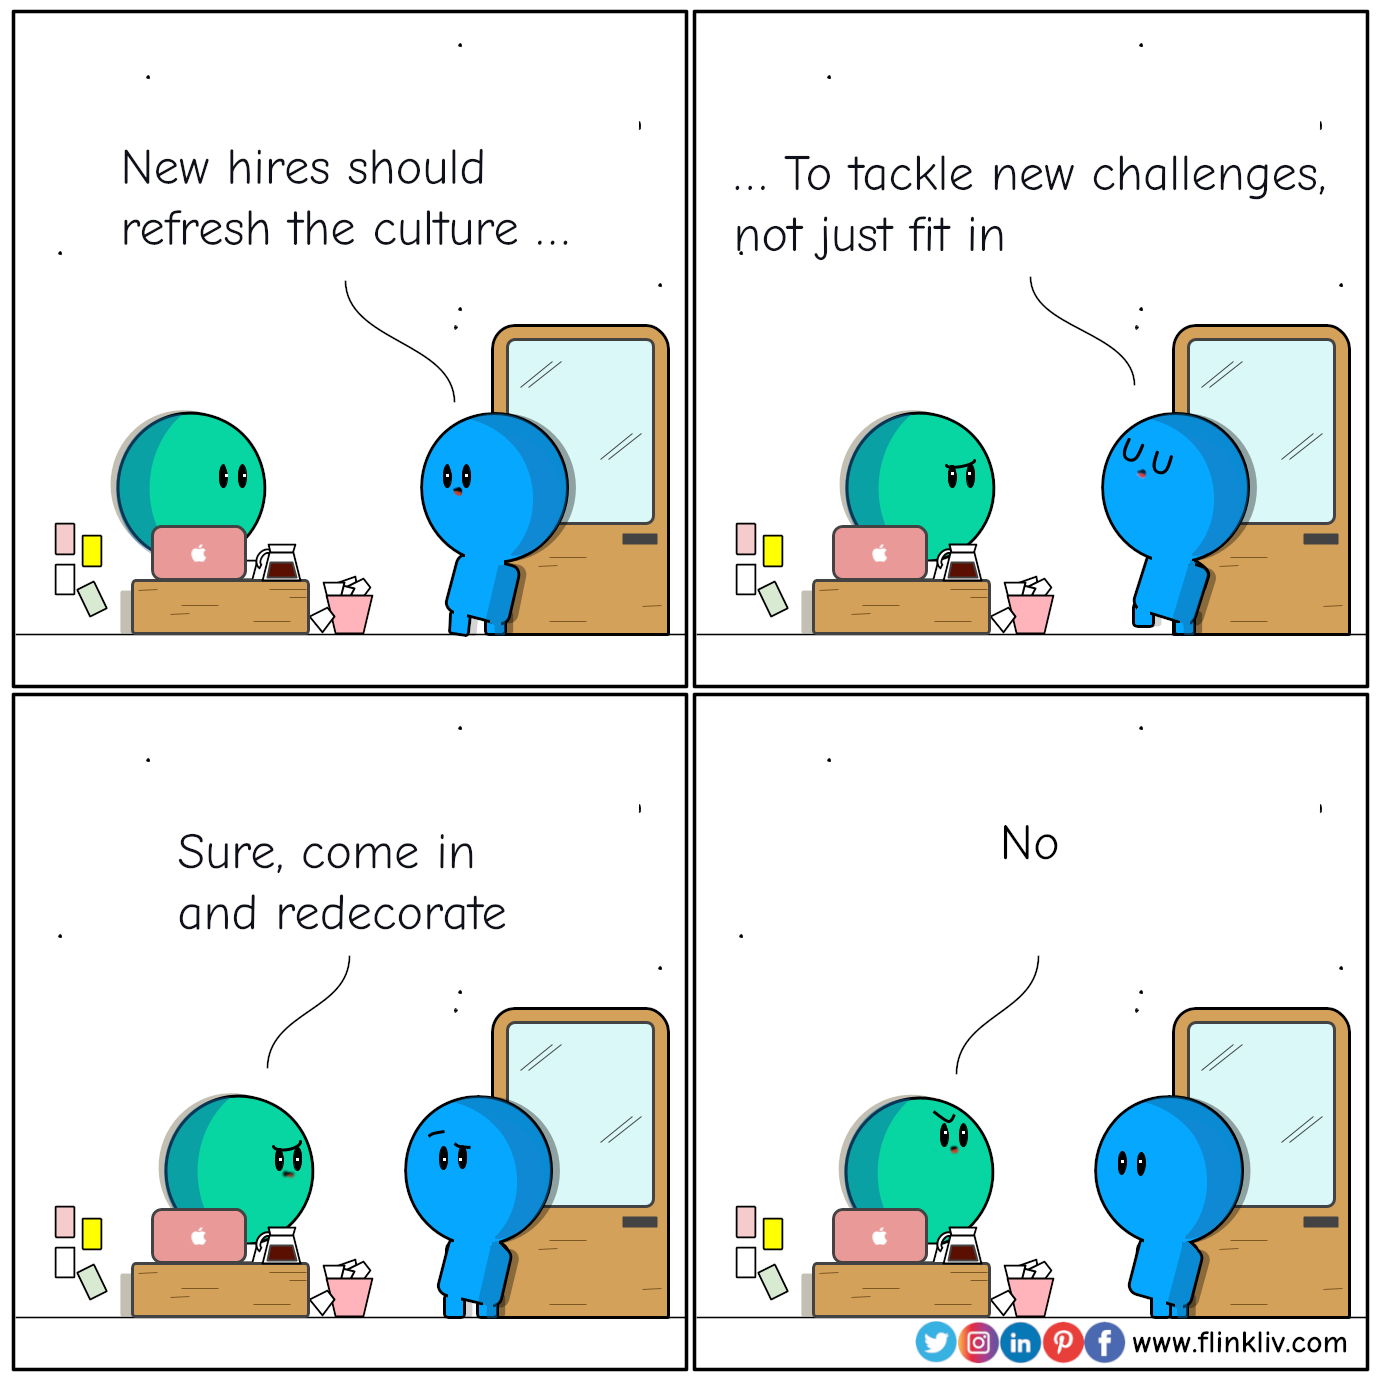 Conversation between A and B about culture fit. 
				A: New hires should refresh the culture to tackle challenges, not just fit in
				B: Sure, come in and redecorate. No.
				By flinkliv.com
            	